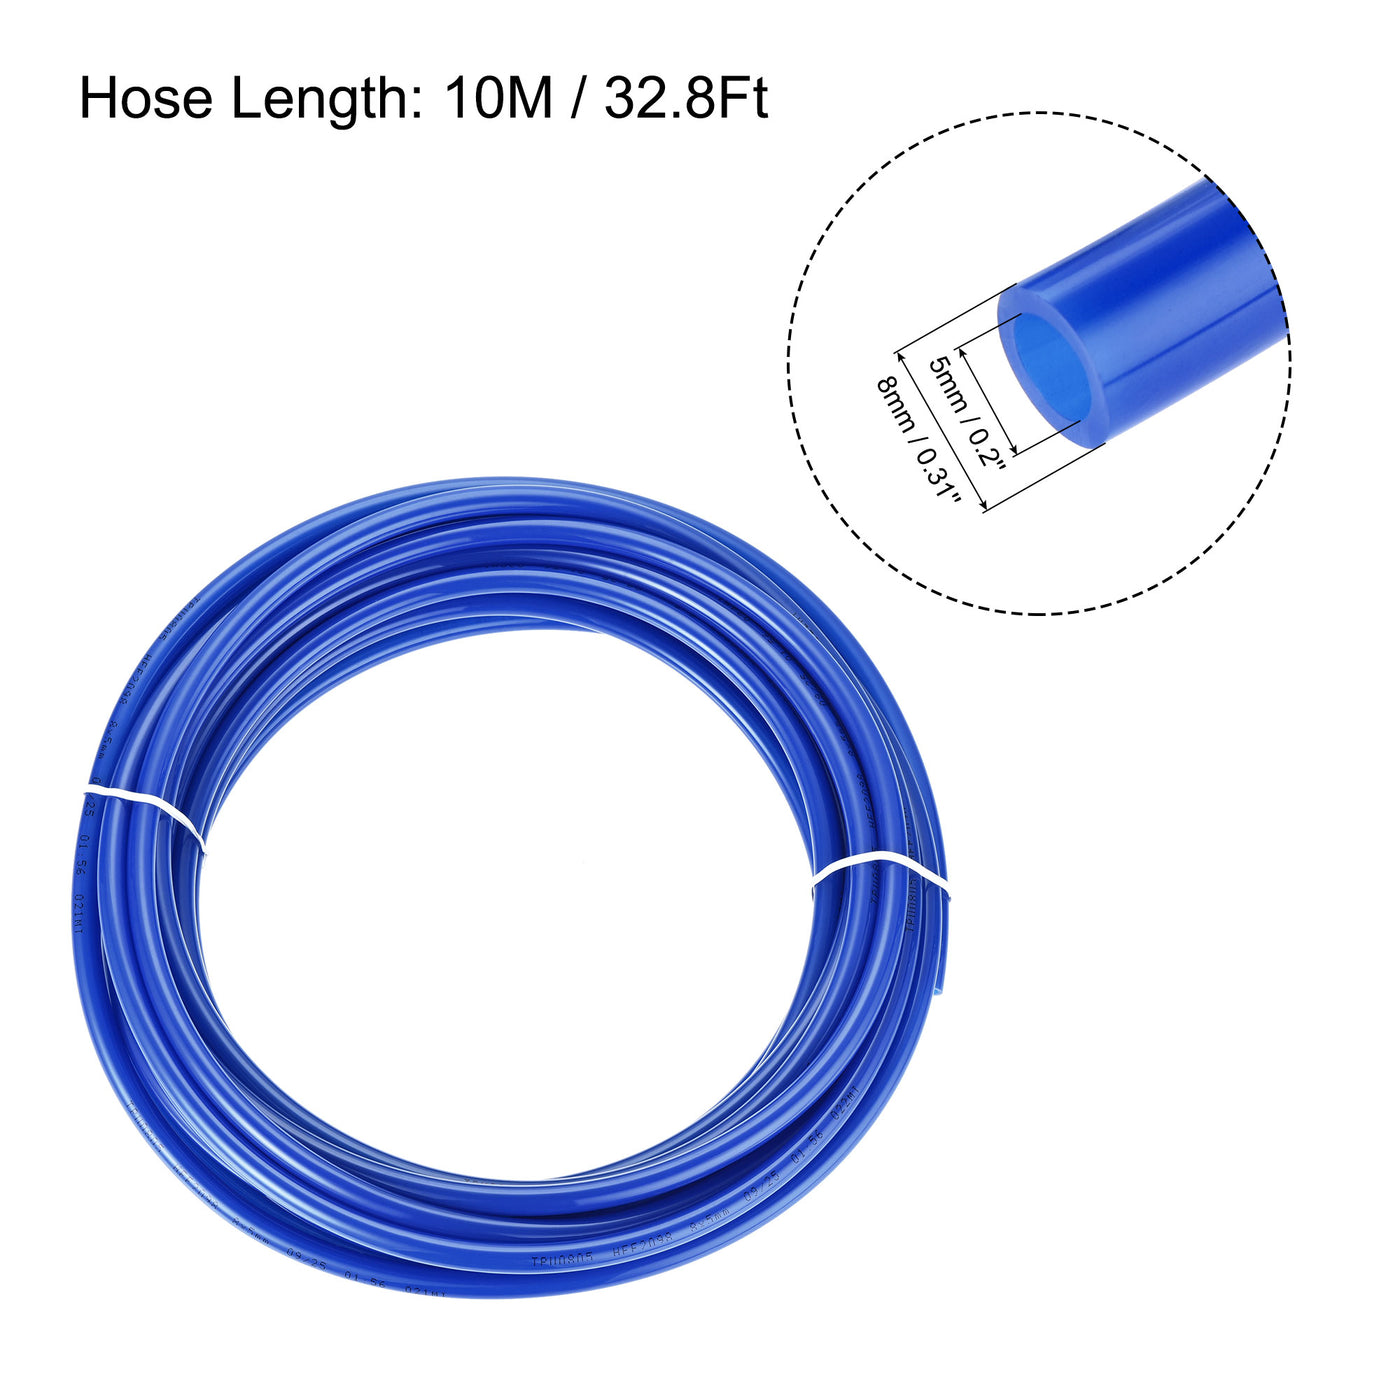 Uxcell Uxcell Pneumatic 8mm OD Polyurethane PU Air Hose Tubing Kit 10 Meters Blue with 10 Pcs Push to Connect Fittings